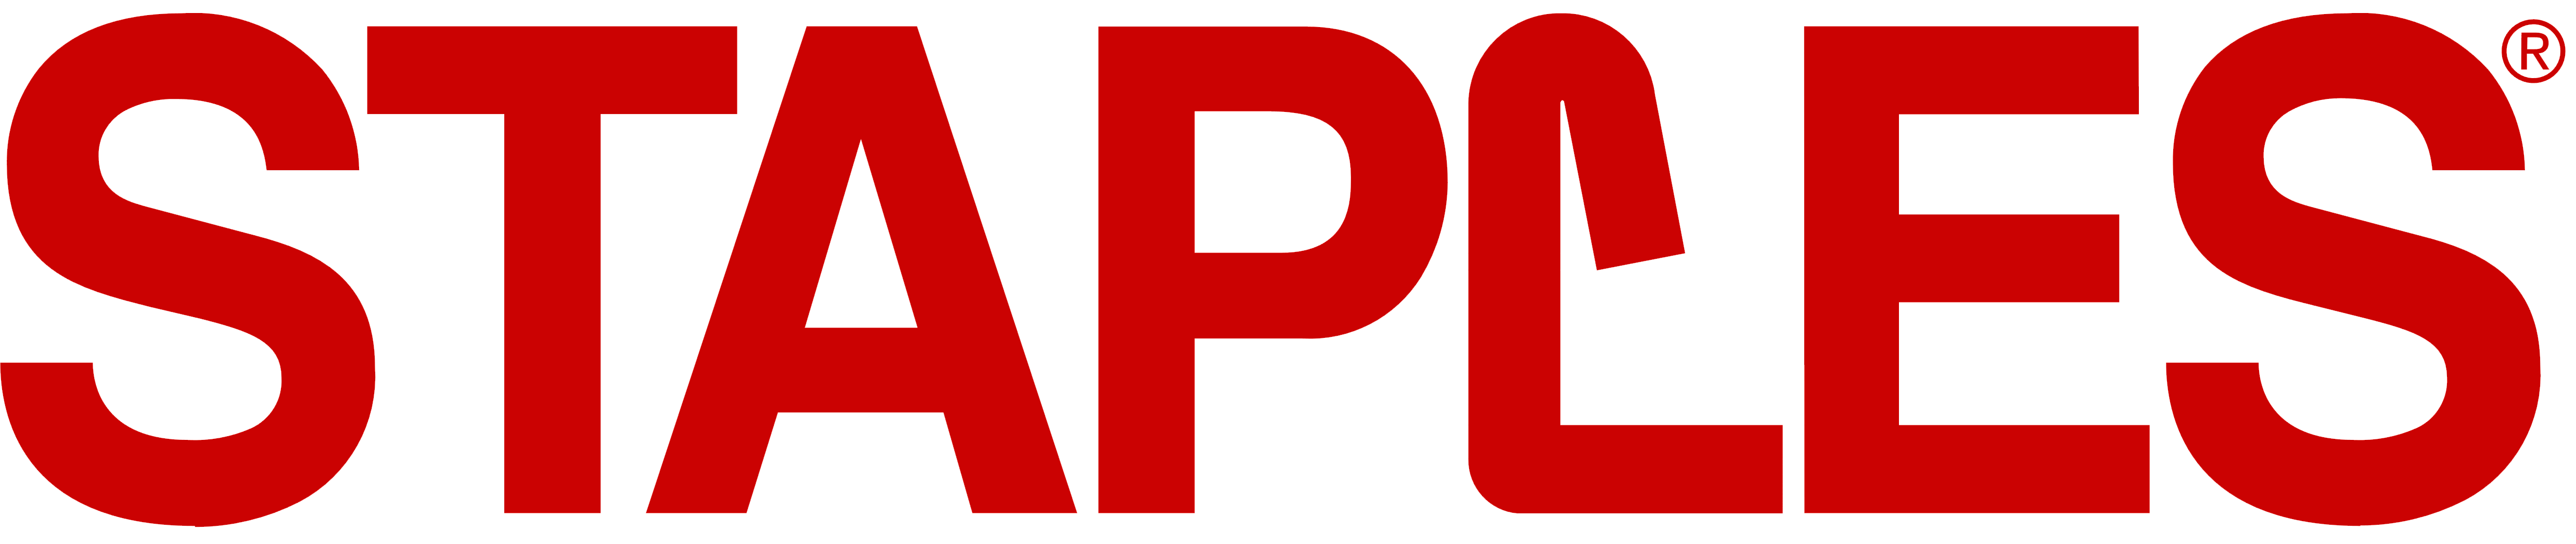 Staples Old Logo - Staples Old Logo Png Image